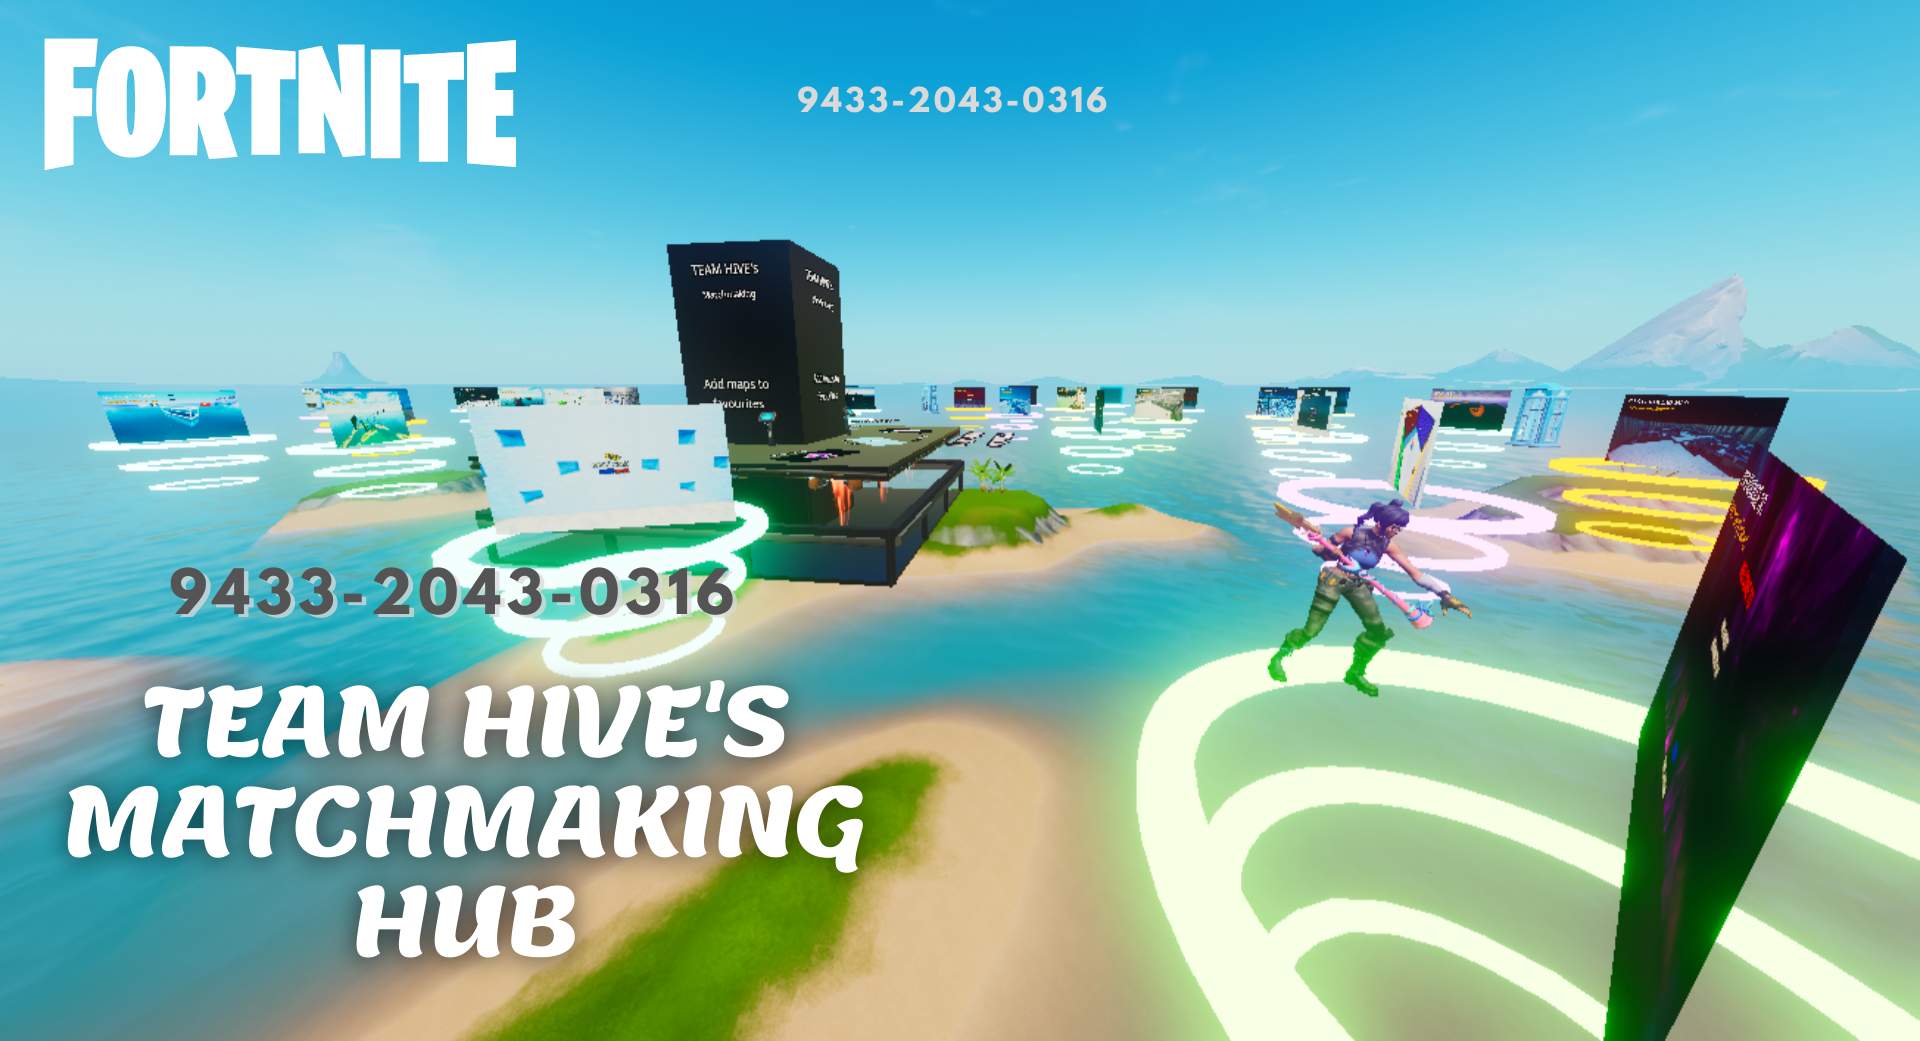 TEAM HIVE’S MATCHMAKING HUB SKYBASE